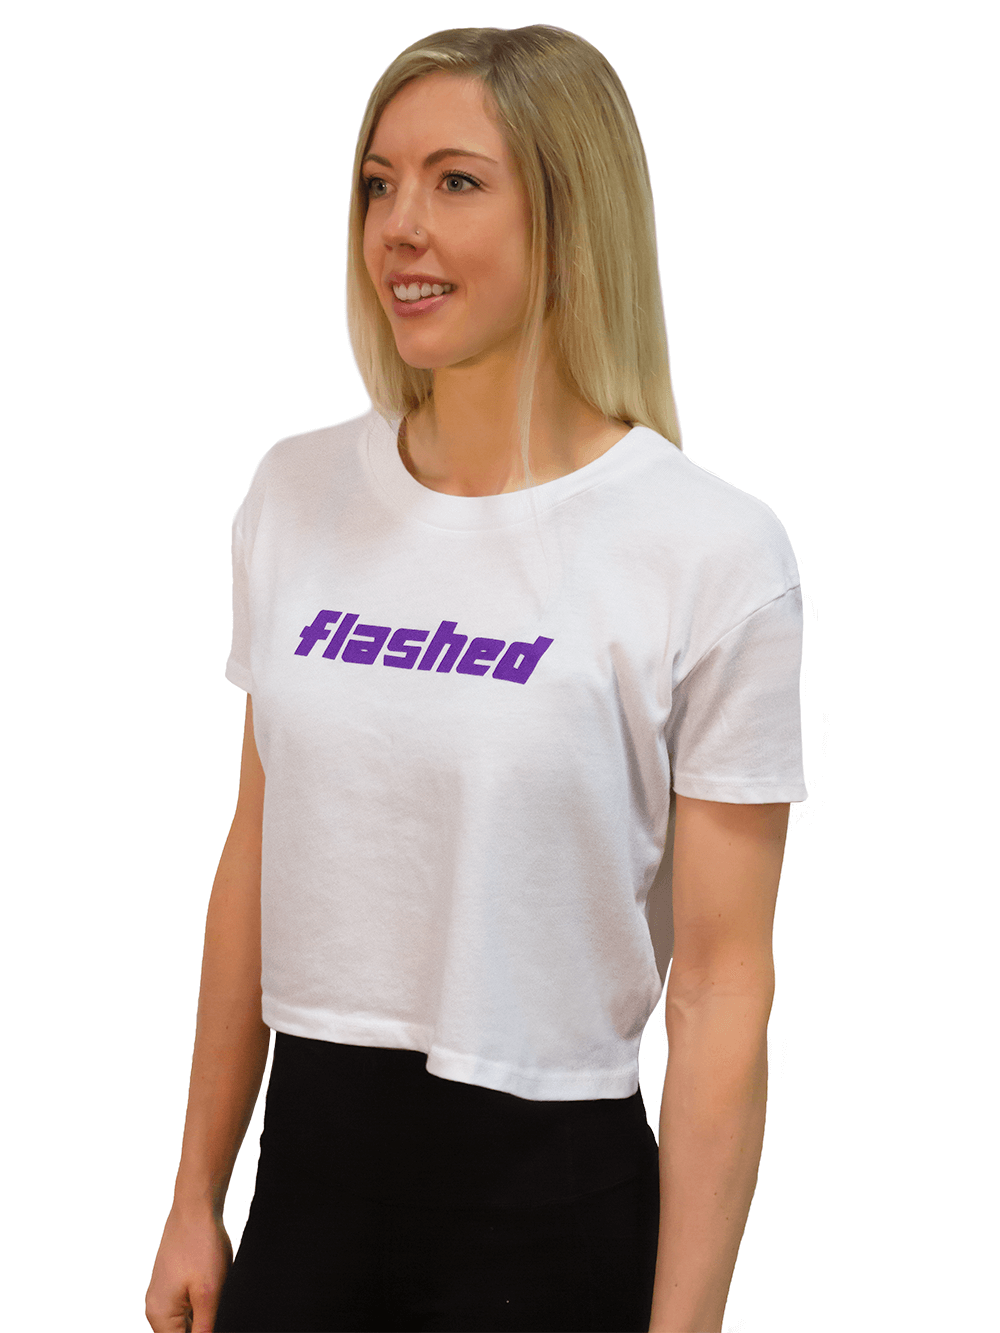 https://www.flashed.com/wp-content/uploads/2021/03/Crop-Top-Front-Final.png